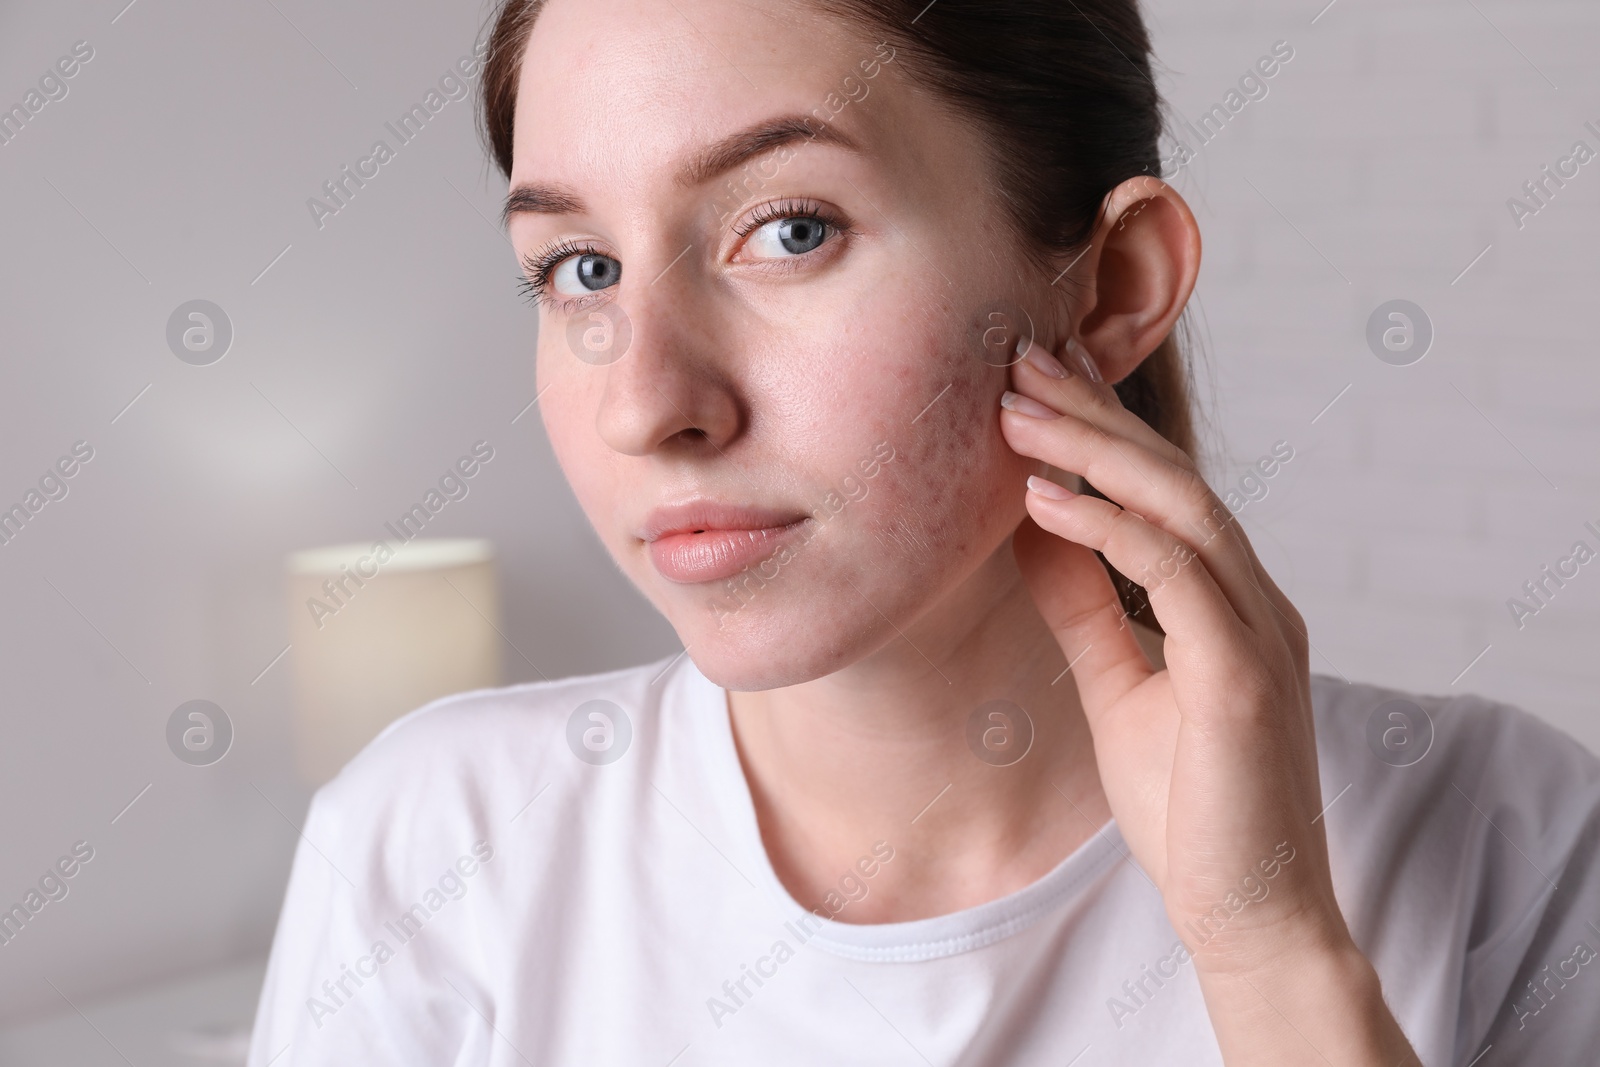 Photo of Young woman with acne problem at home